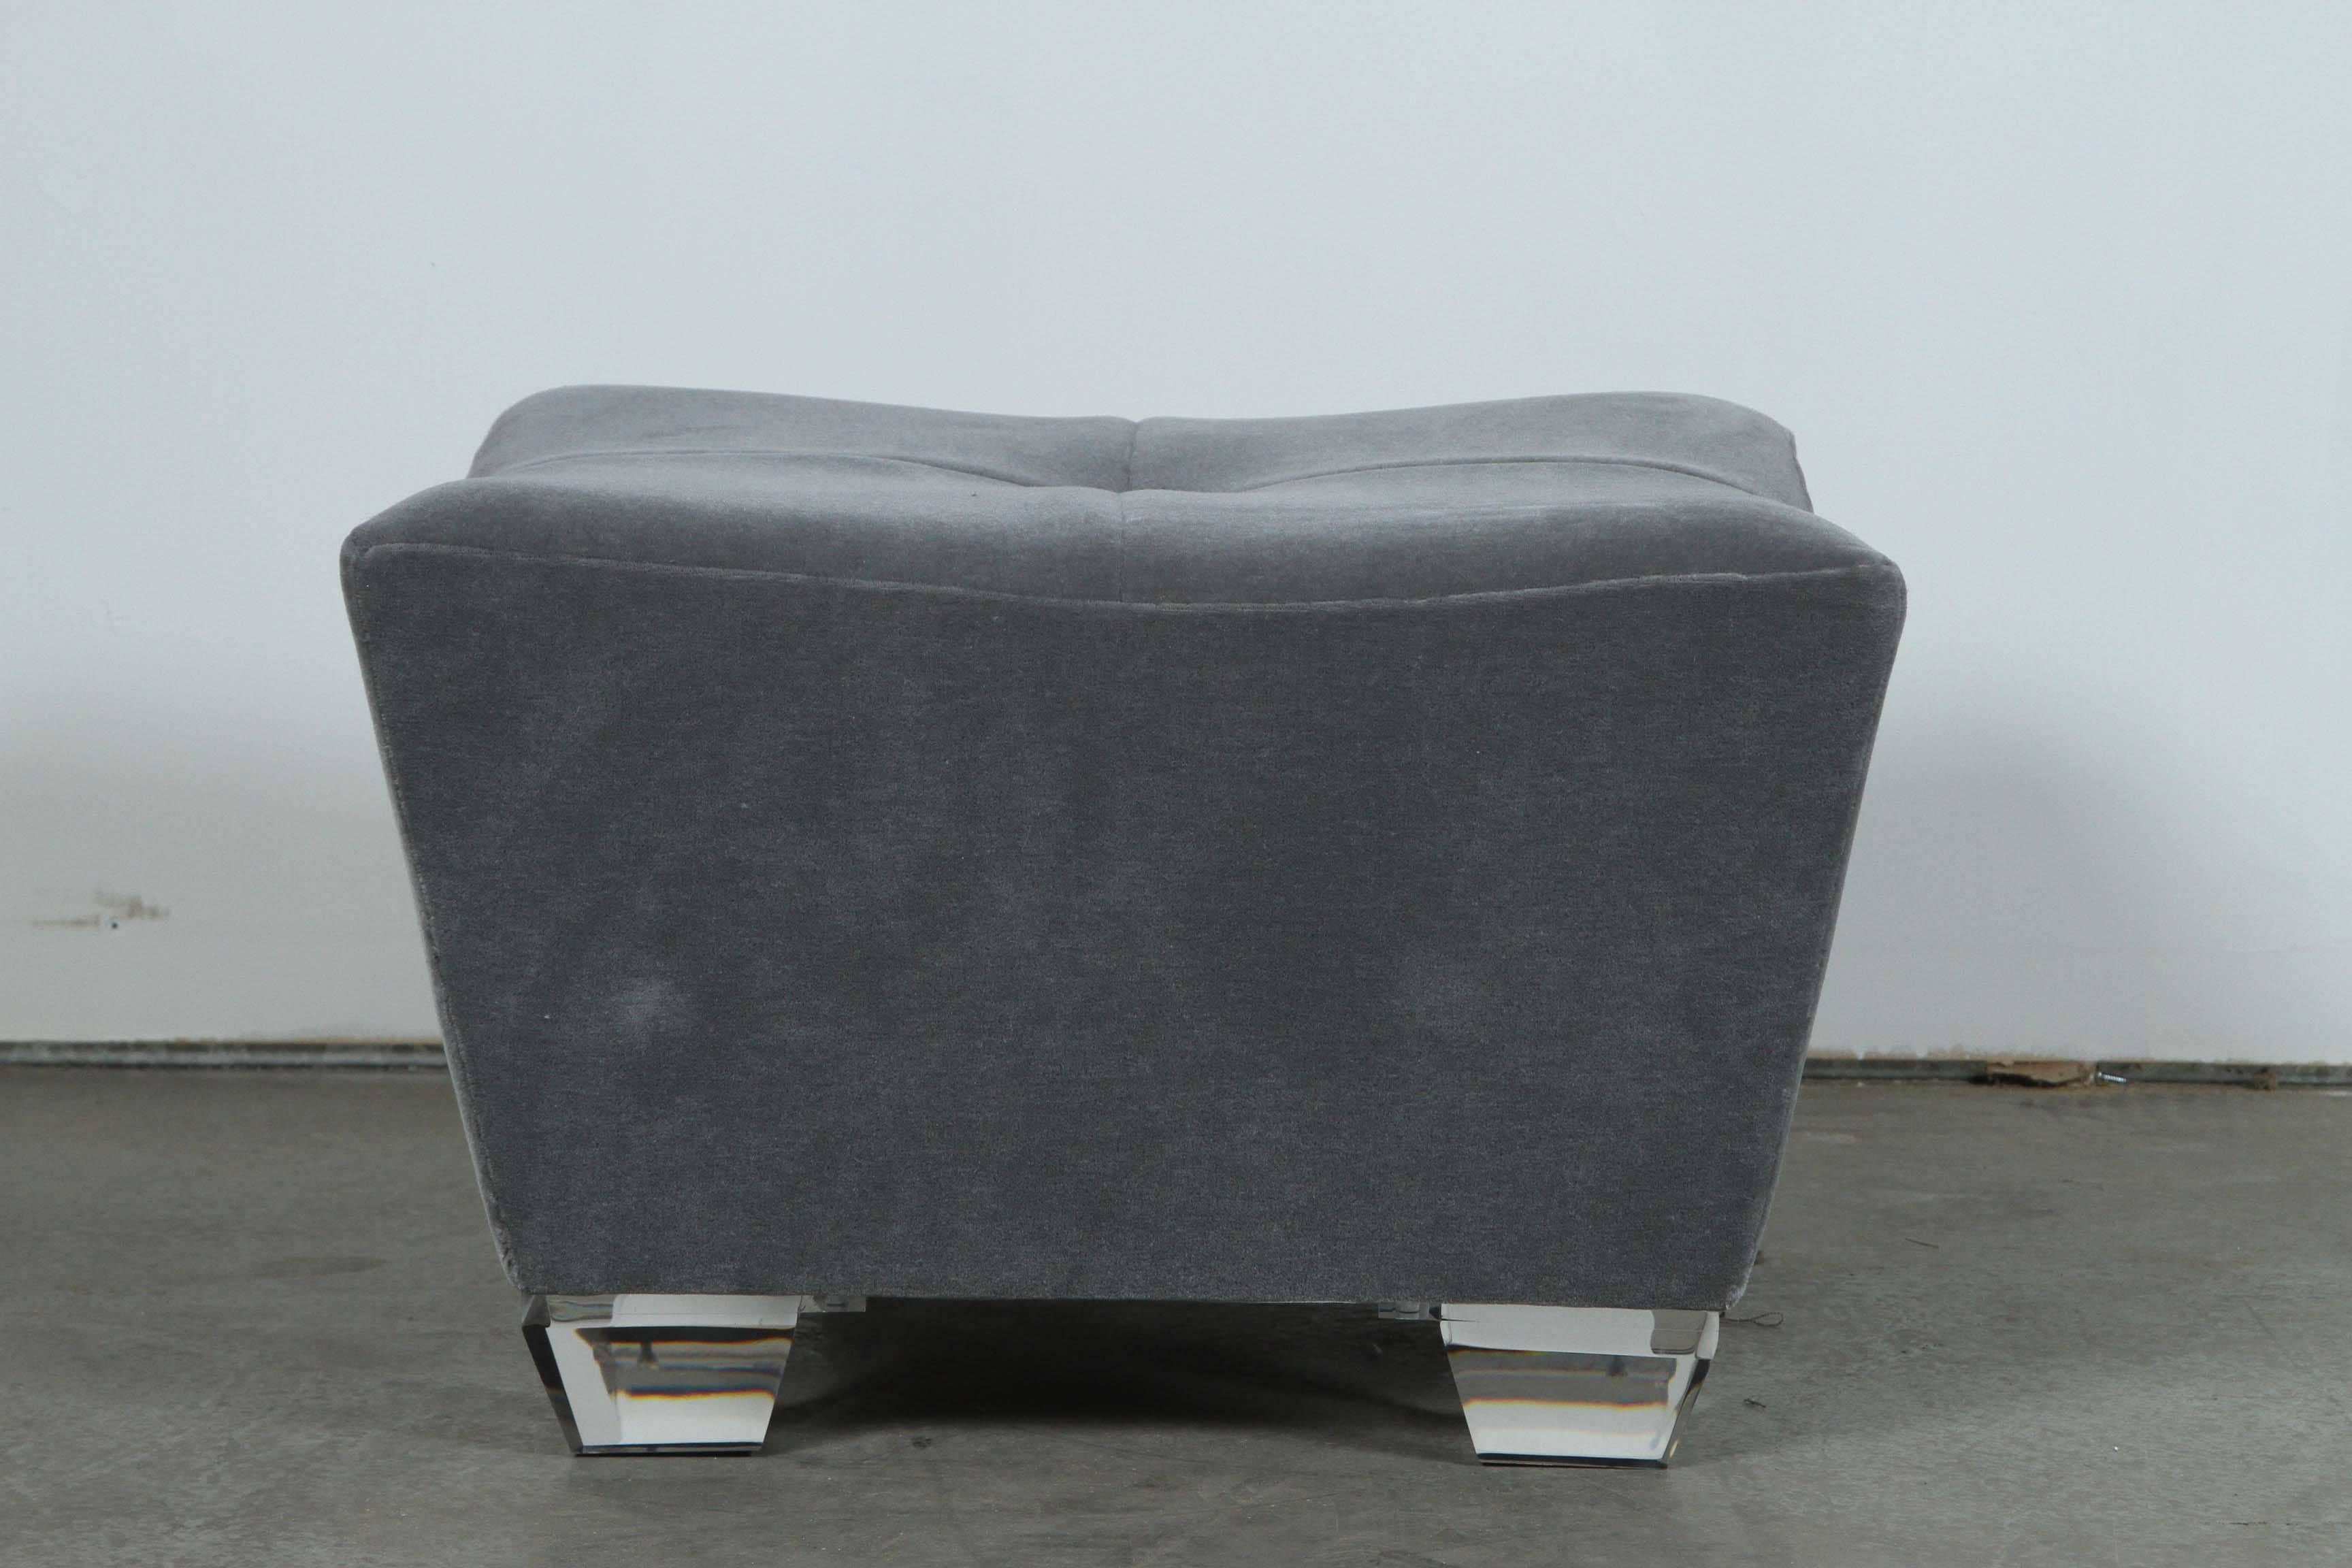 Elegant pair of Ottomans designed by our gallery.
The trapezoid frame is upholstered in a beautiful dove gray mohair fabric with
the top being quartered and finished with a large centre button.
Large Lucite trapezoid legs follow the lines of the